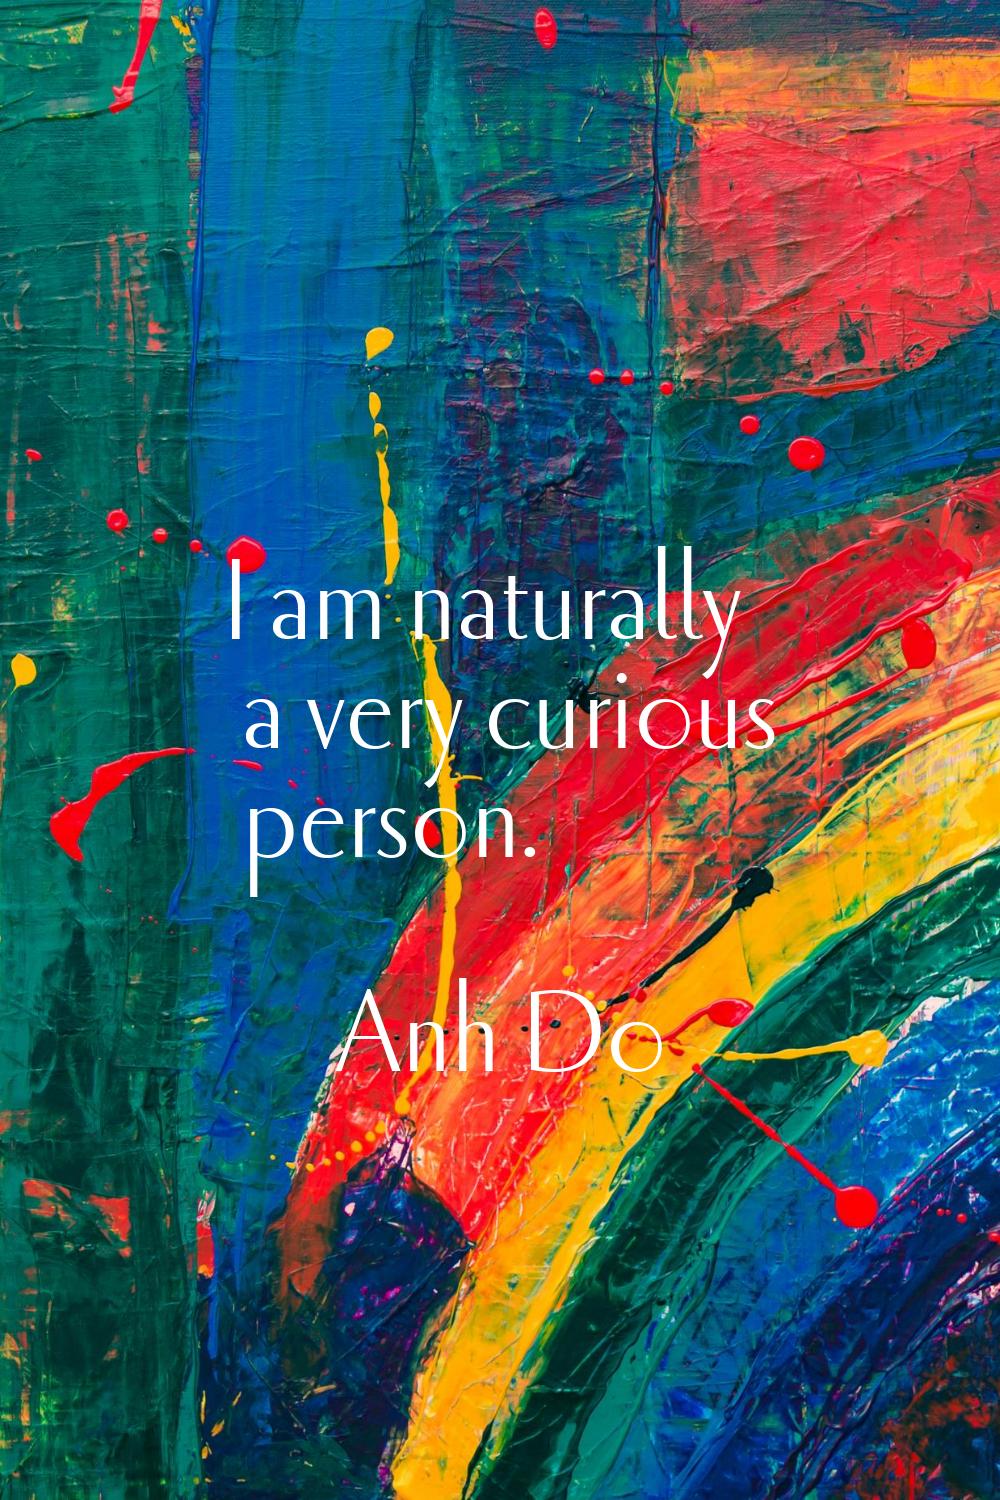 I am naturally a very curious person.